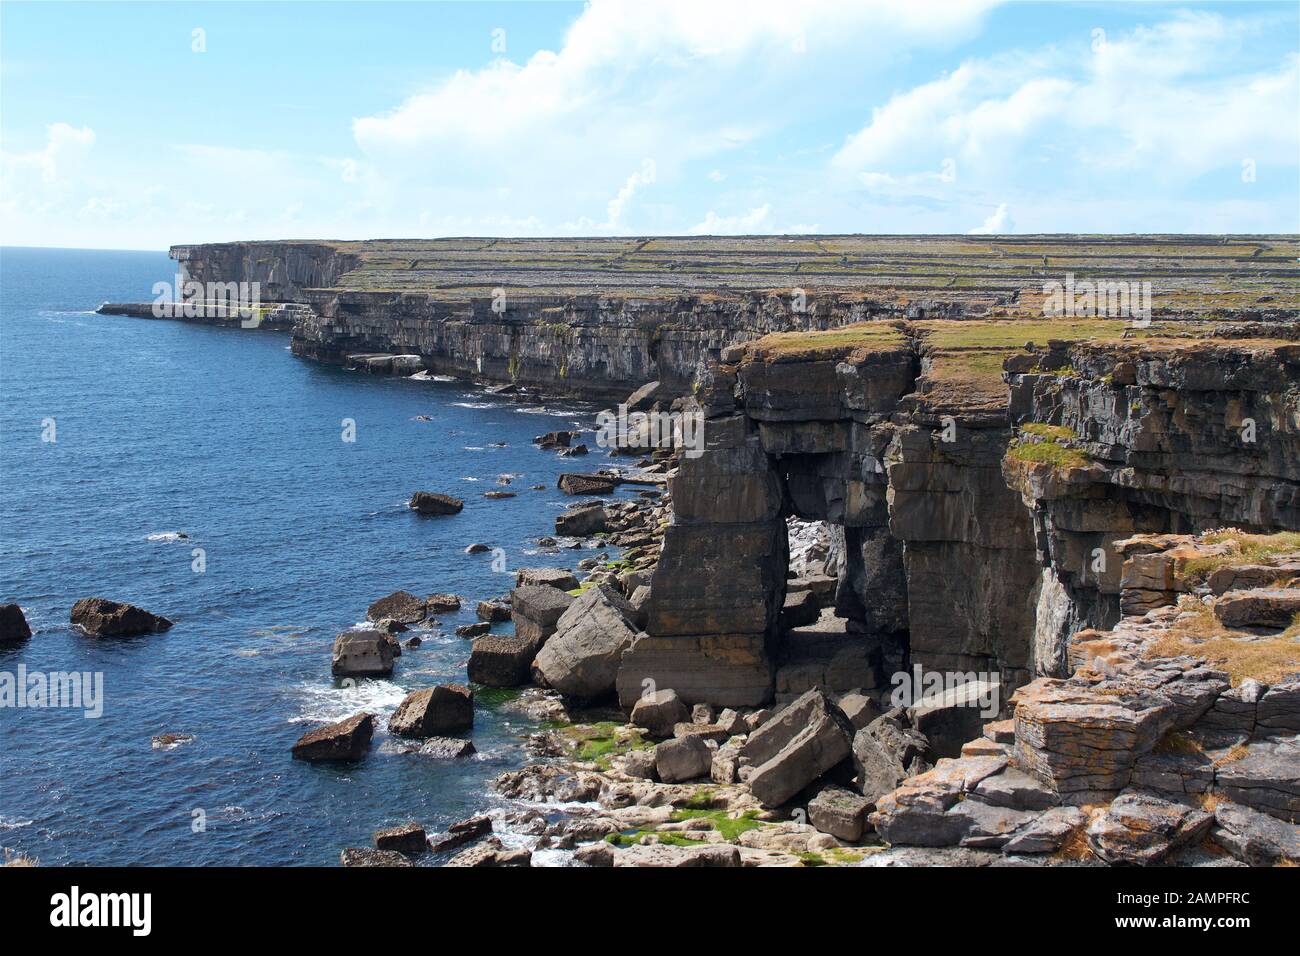 Rugged cliffs at Inishmore, the largest of the Aran Islands, off the west coast of Galway, Ireland. Stock Photo